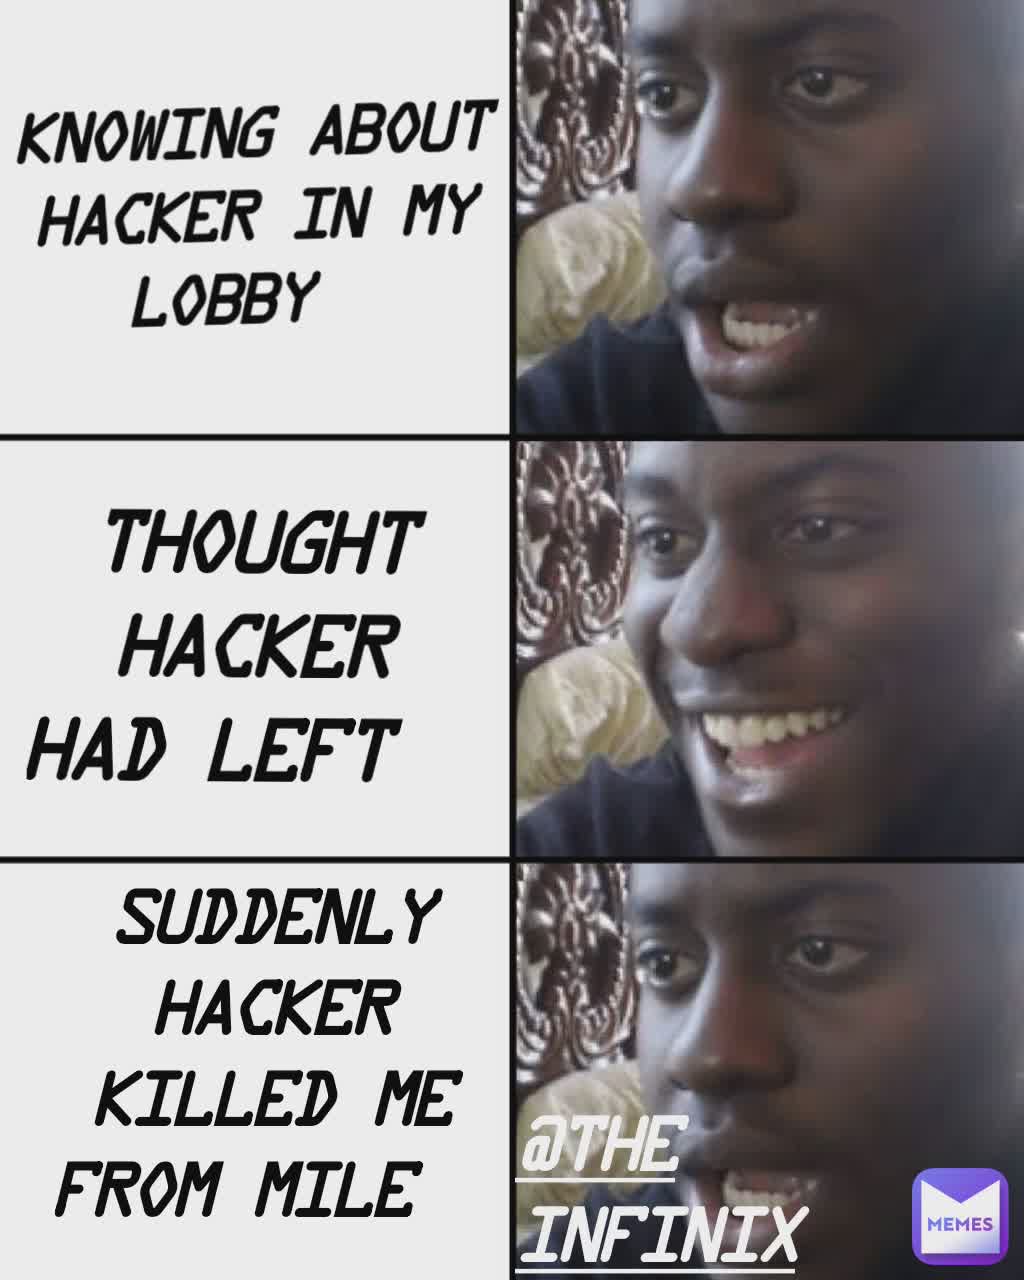 Knowing About Hacker In My Lobby thought hacker had left suddenly hacker killed me from mile @THE
INFINIX
